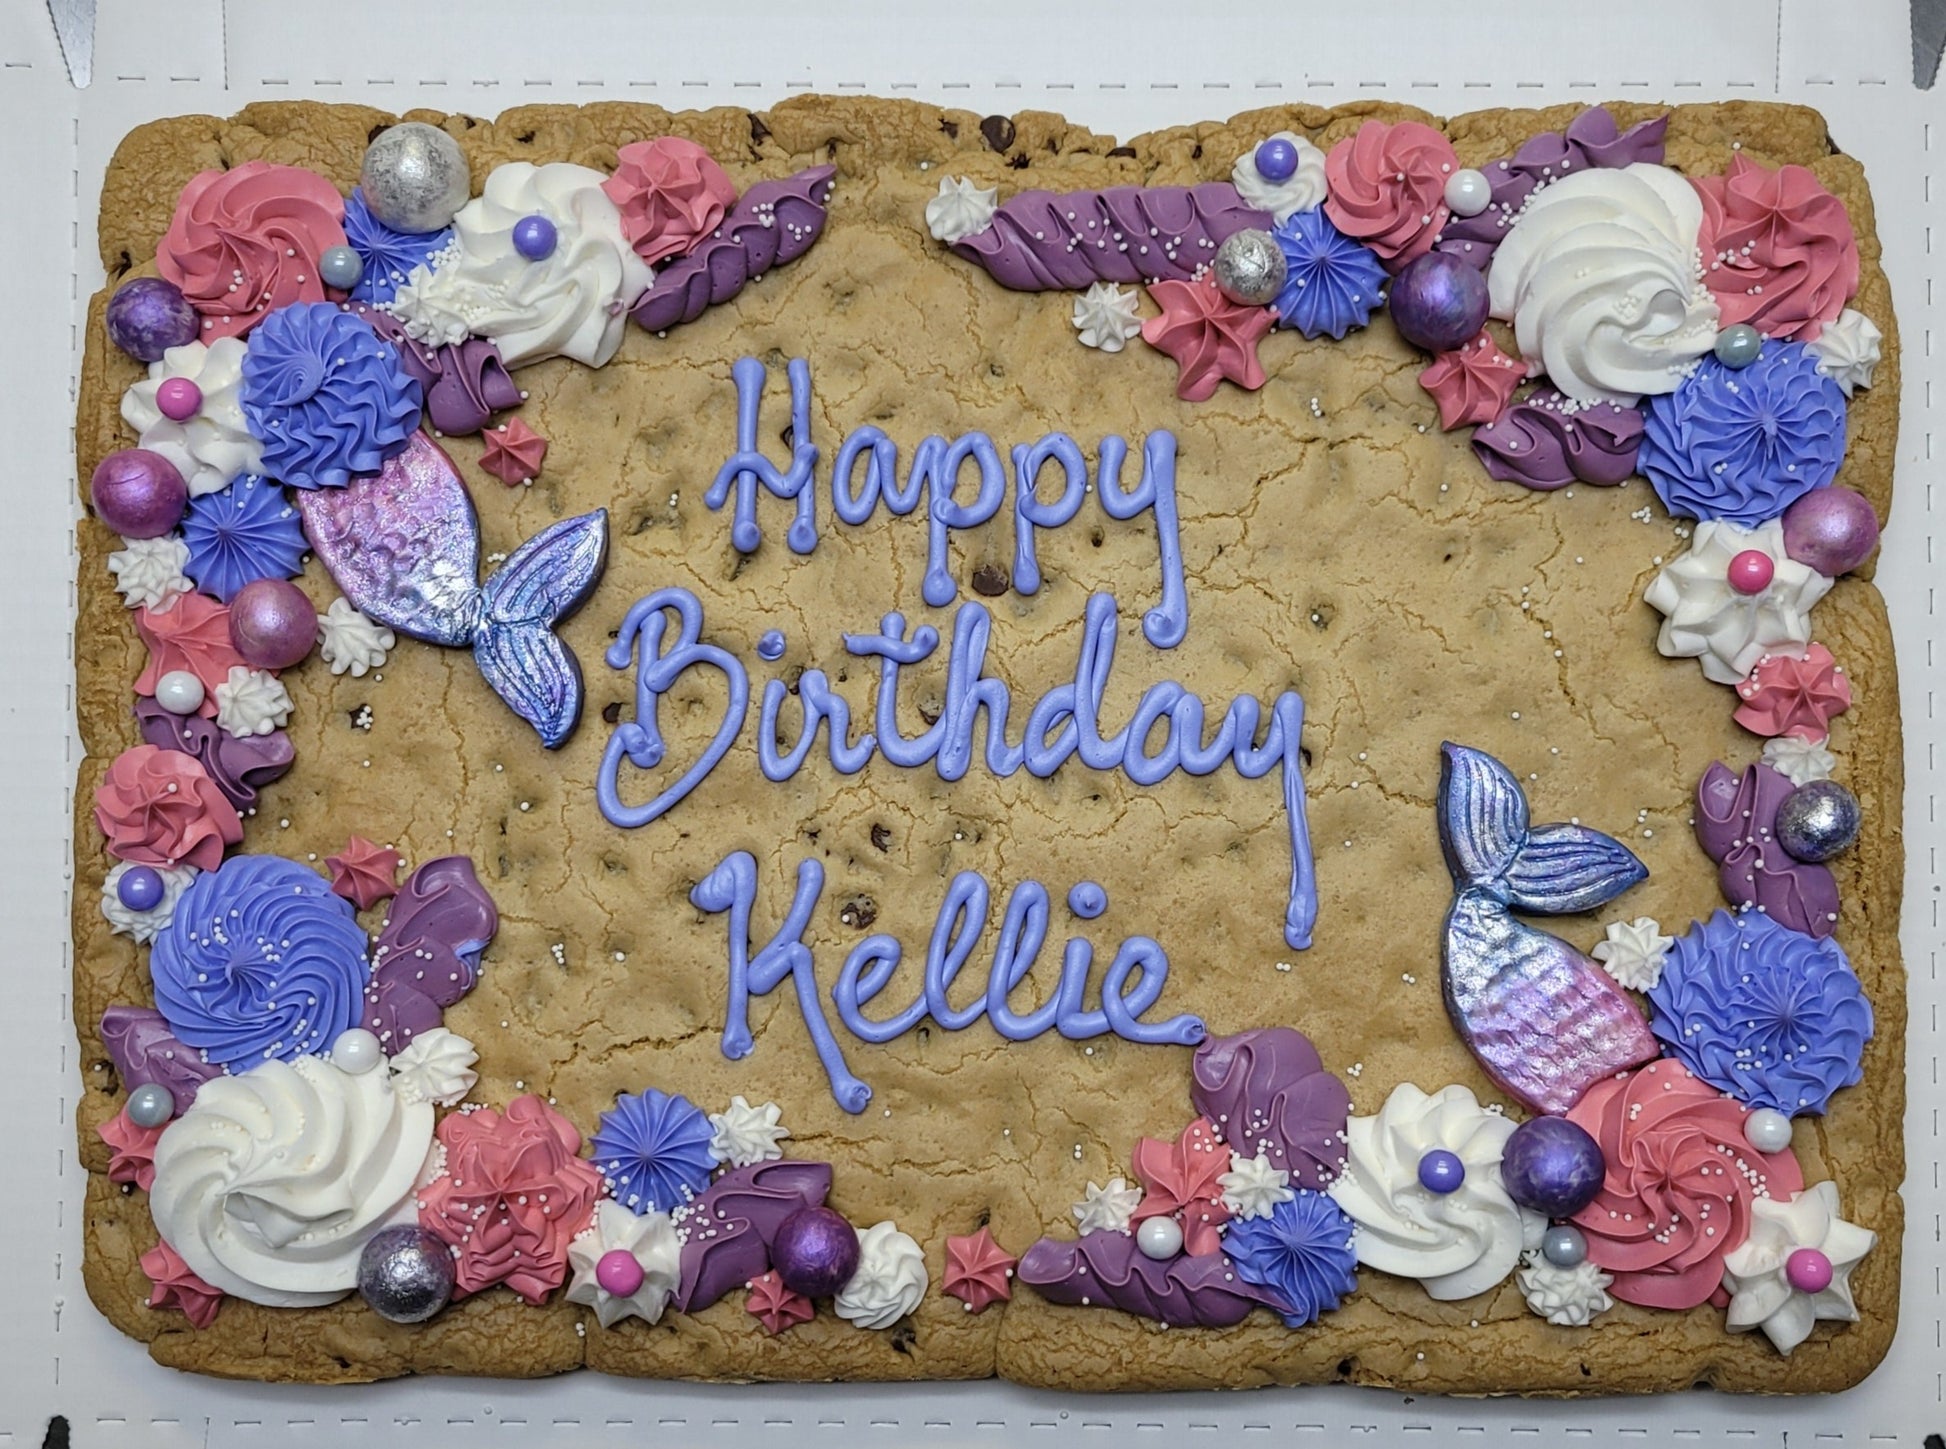 Half-Sheet Cookie Cakes – The Humble Cookie Shop